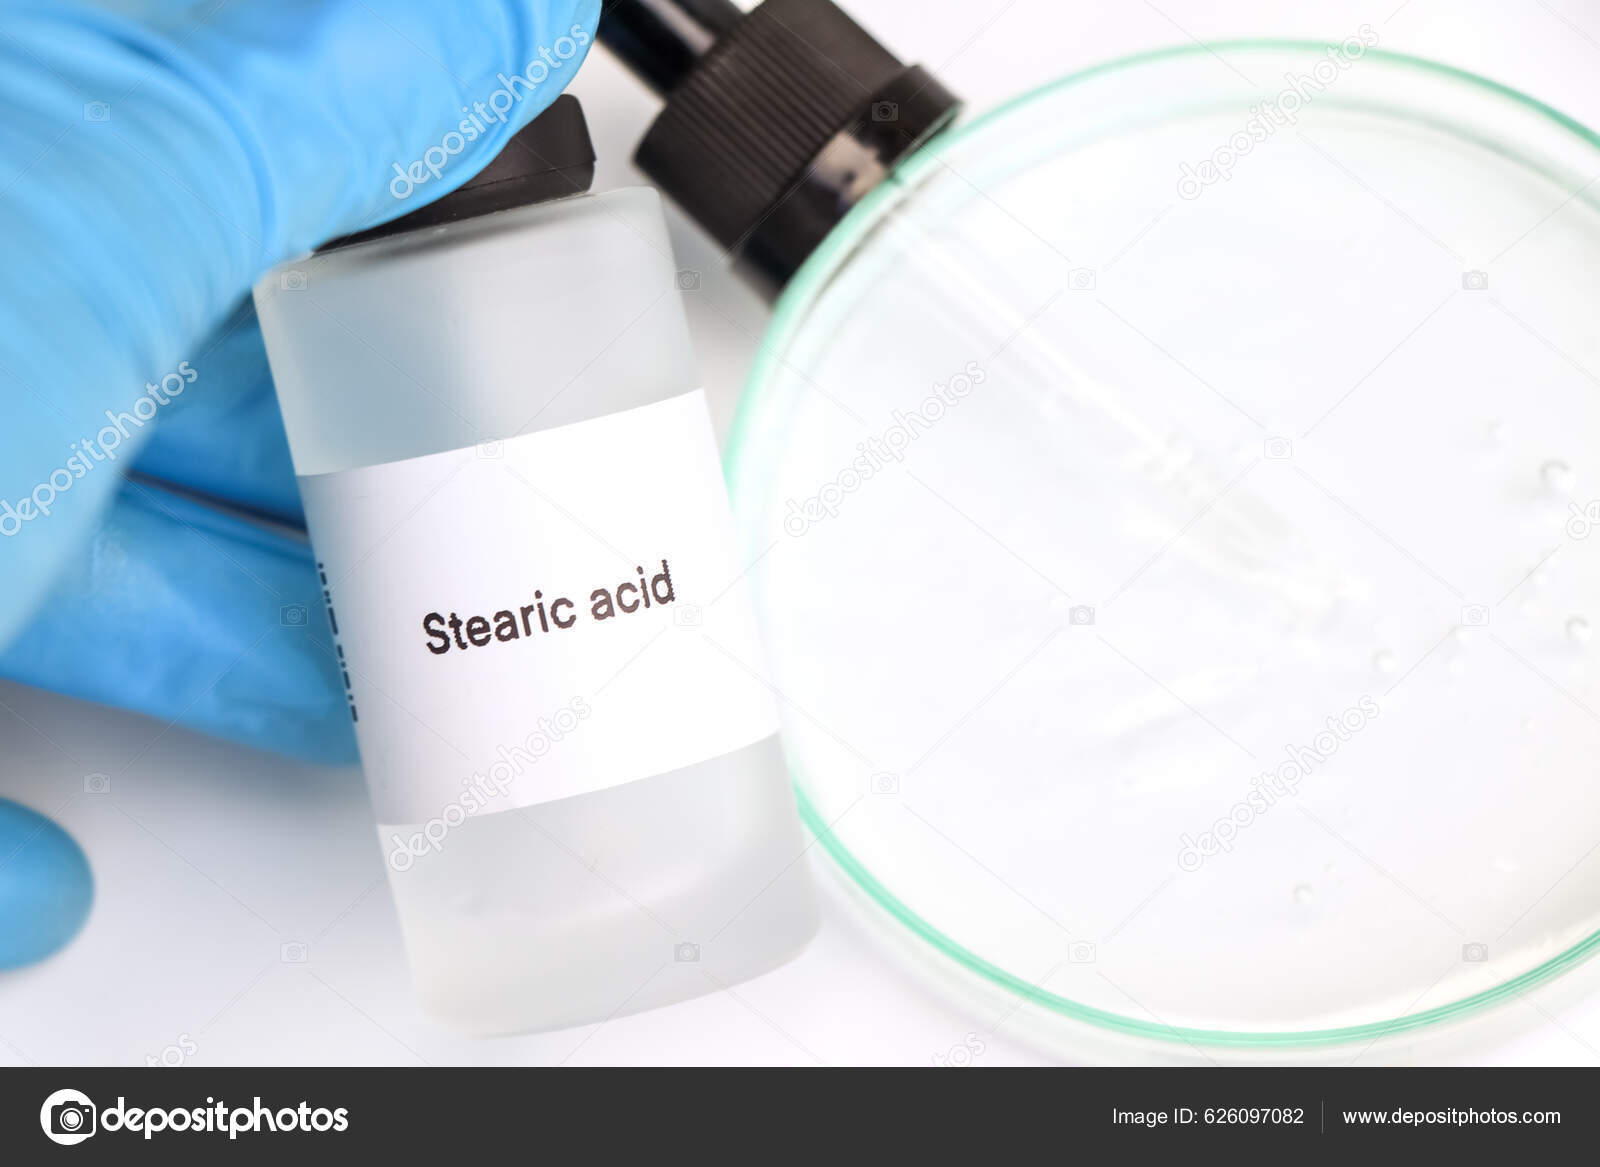 What Is Stearic Acid? How Is It Used In Skincare Products?